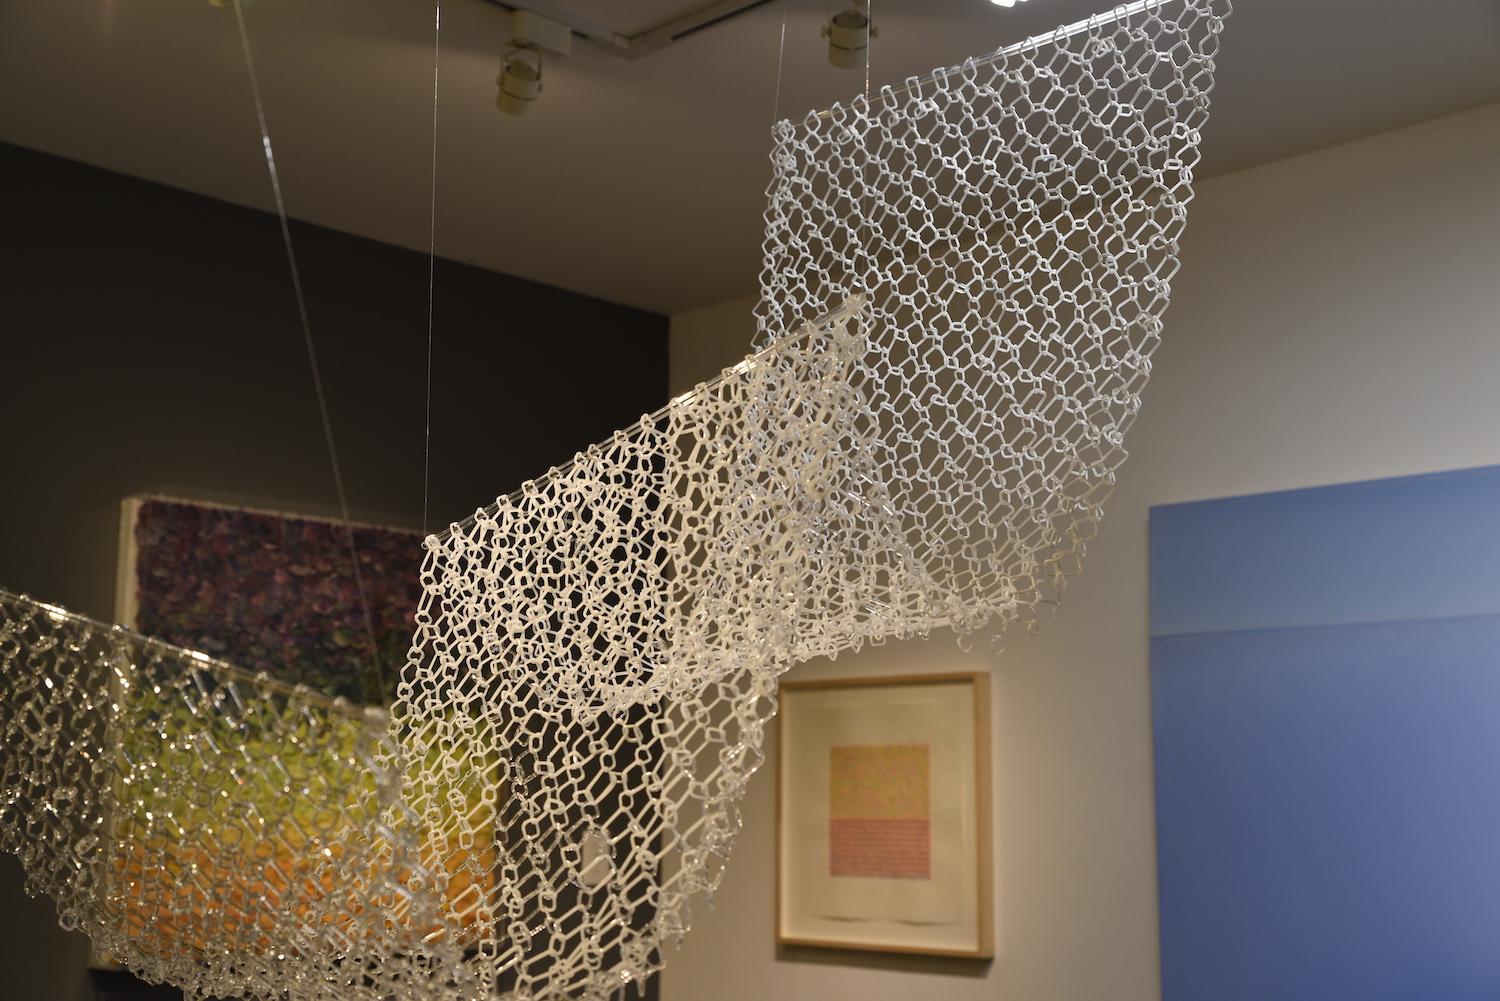 This long hanging sculpture by David Licata is composed of square links of clear and white torch-worked borosilicate glass. The square links are joined together in a Japanese four-to-one chain maille pattern, cascading downward from three clear